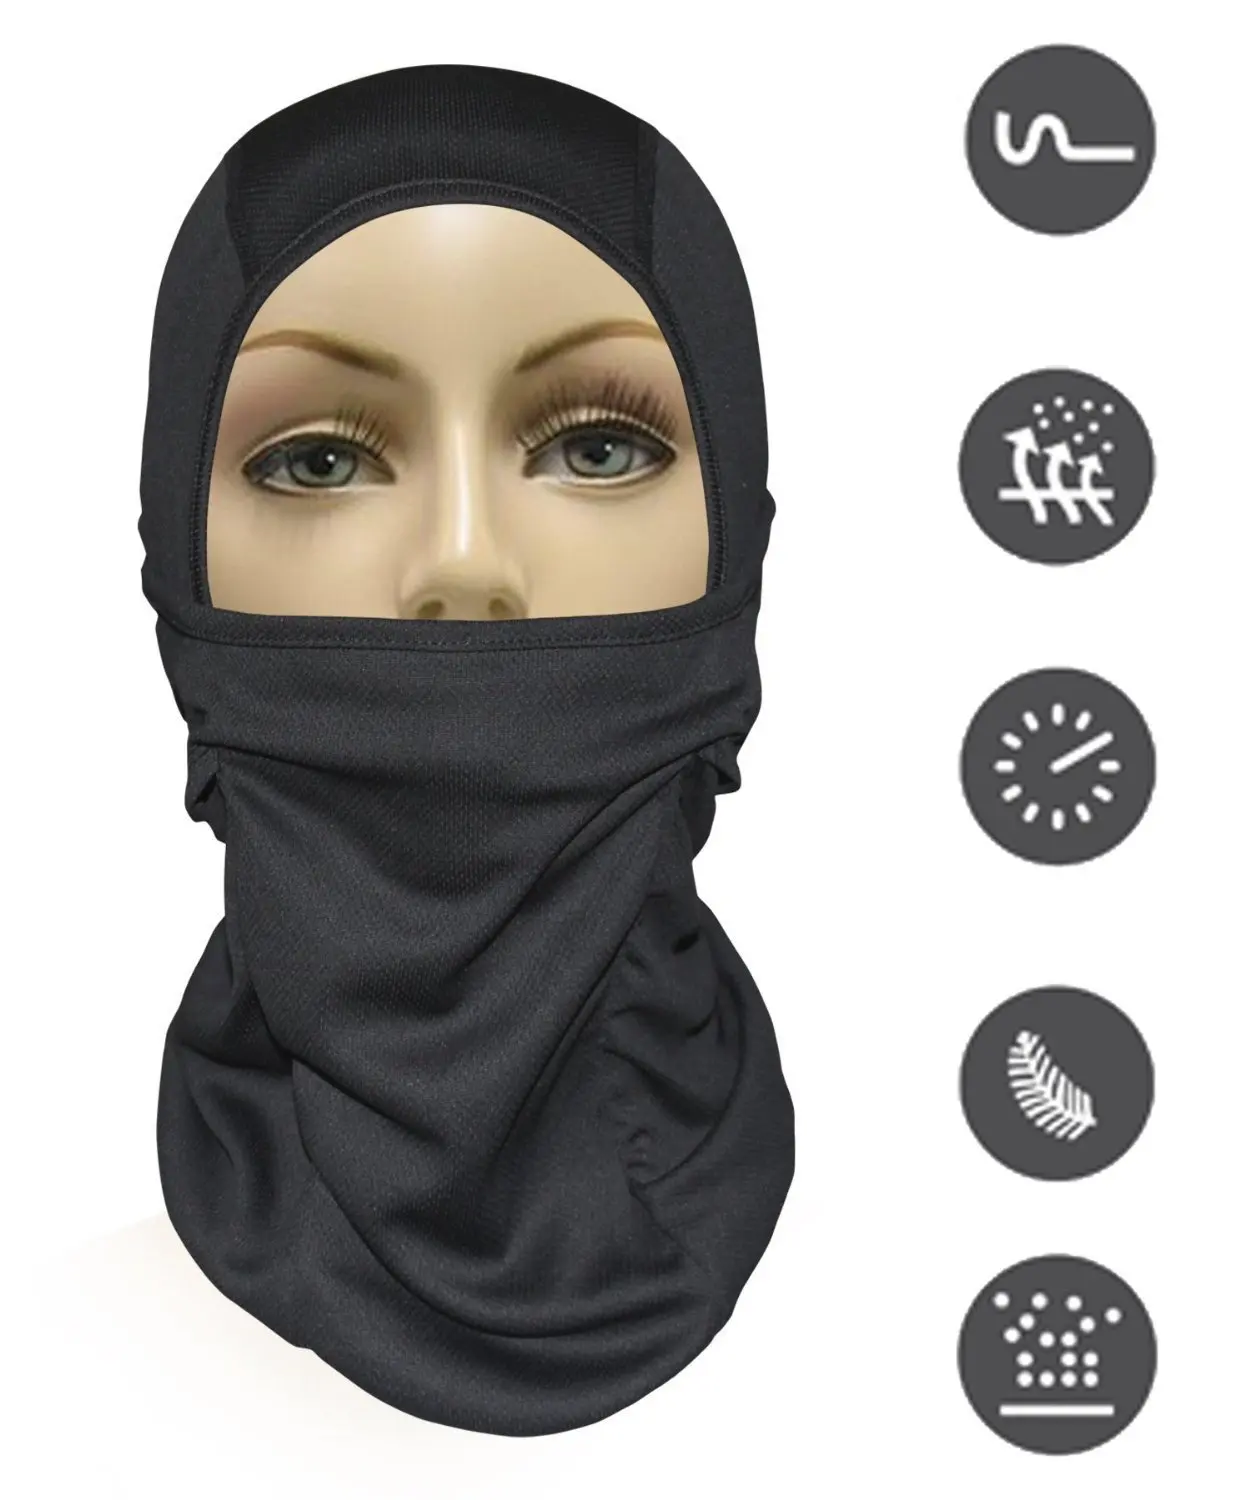 MJ Gear 9 in 1 Full Face Mask Motorcycle Balaclava, Running Mask for Cold o...